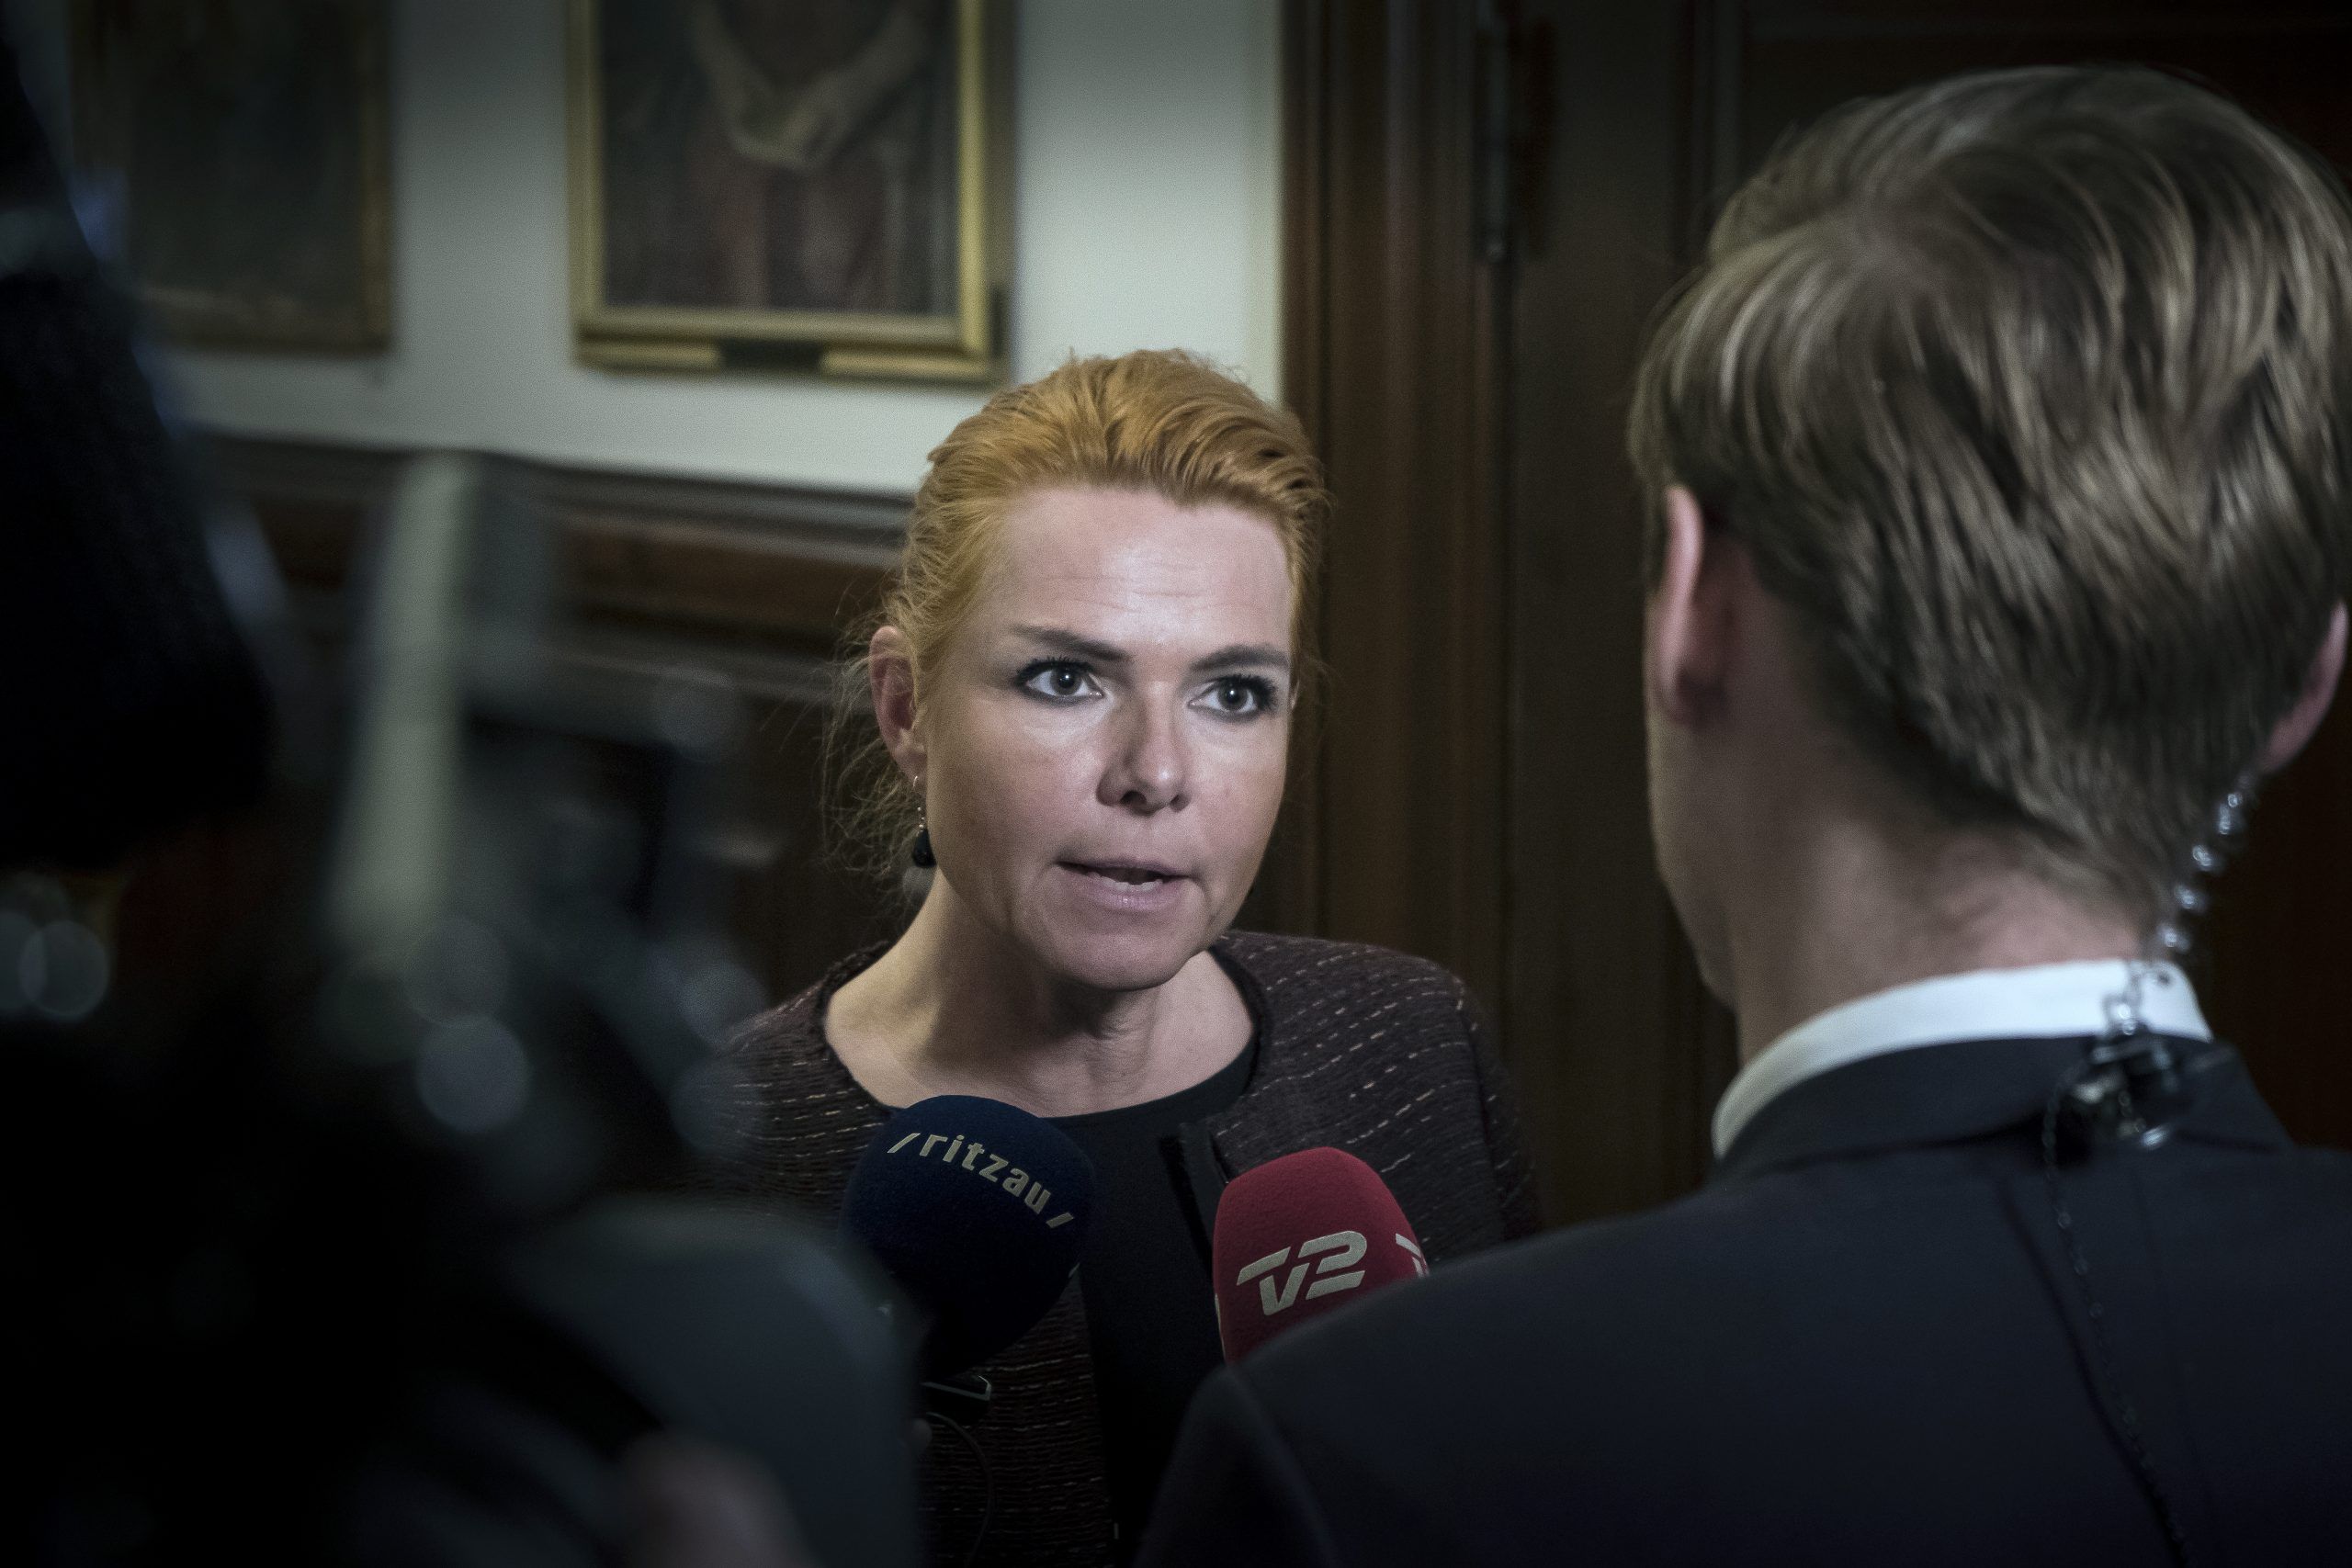 Støjberg sentenced to two months in prison after being found guilty in Supreme Court